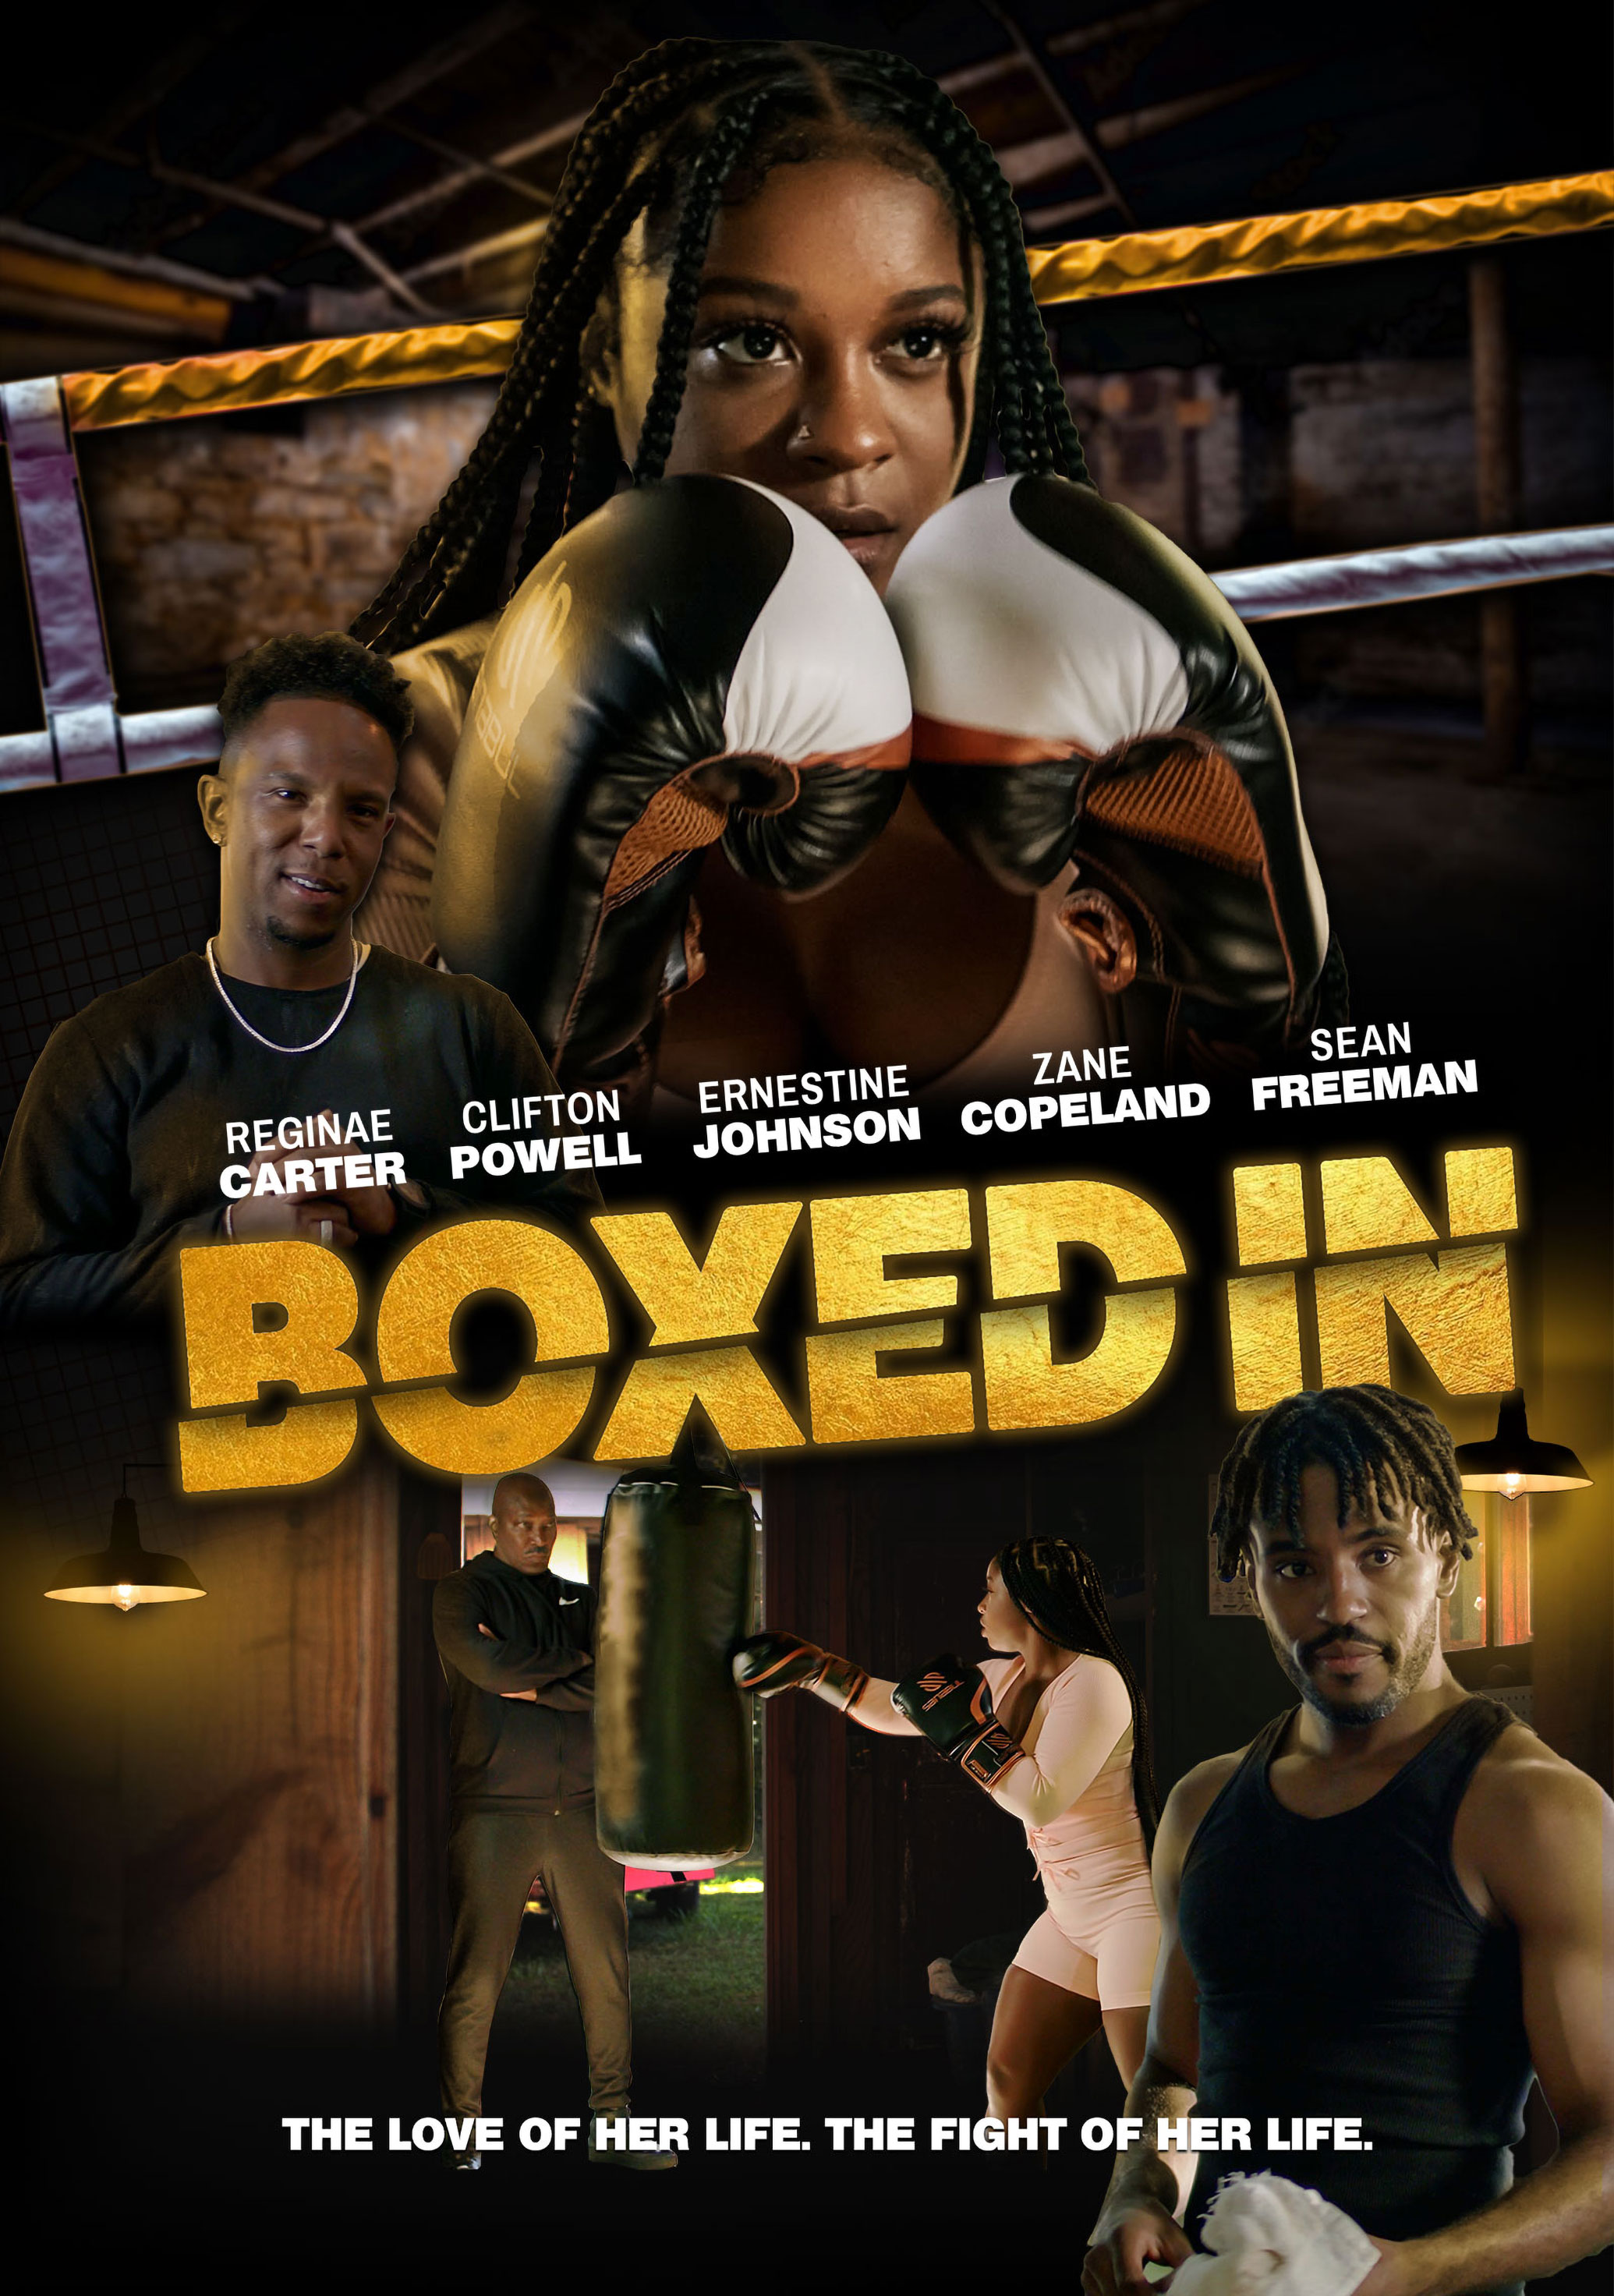 Boxed In (2021) Drama, Directed By Ariel Julia Hairston